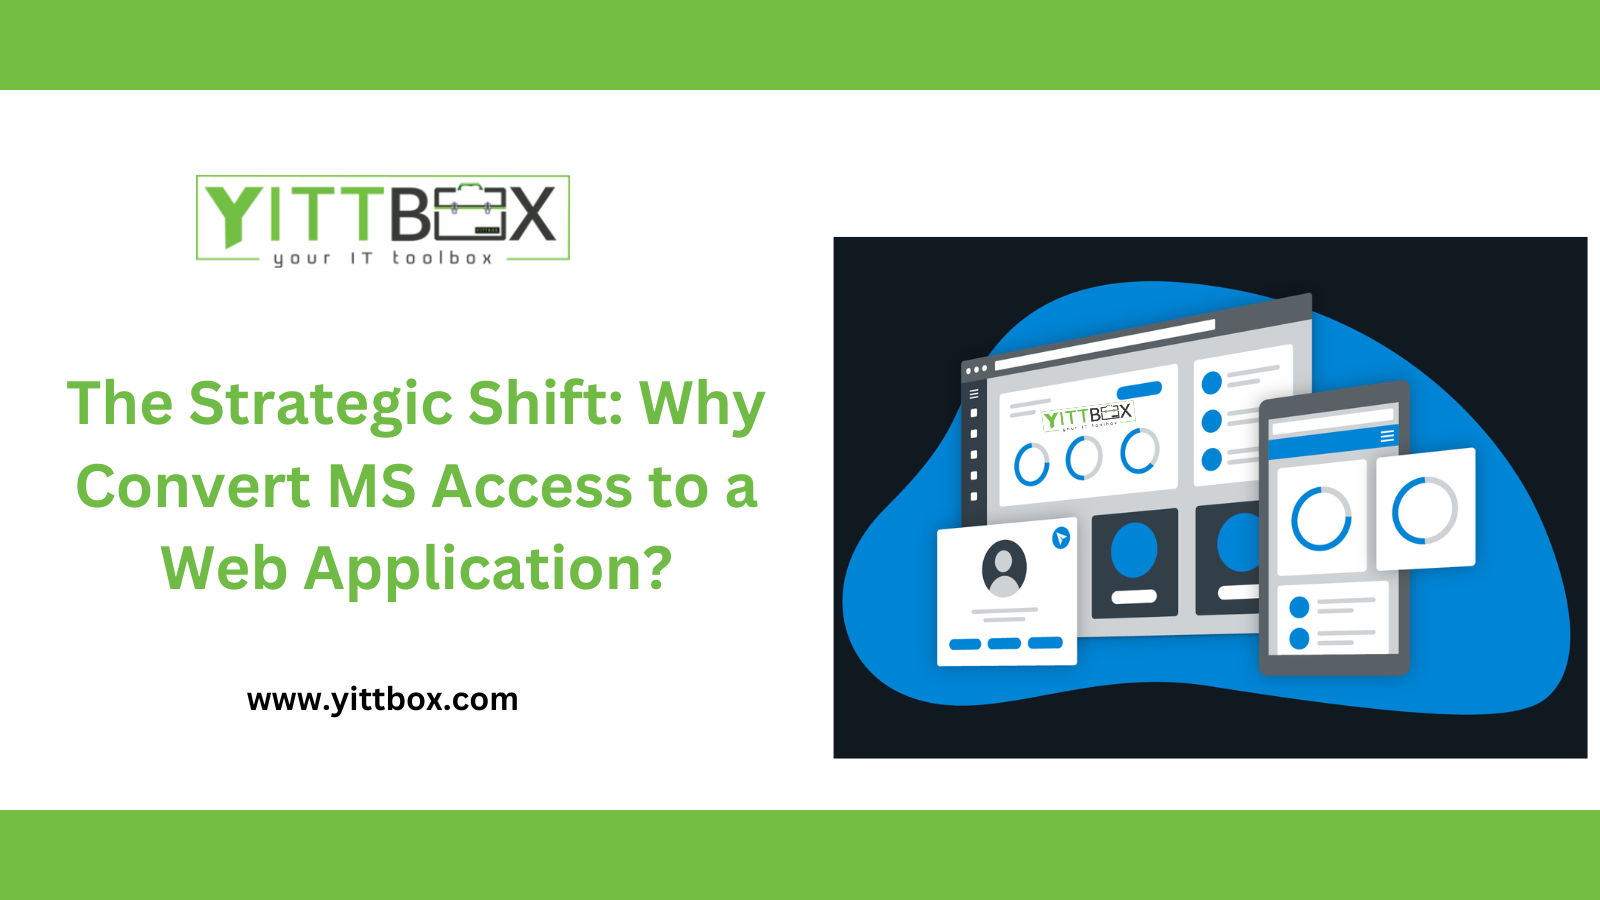 The Strategic Shift: Why Convert MS Access to a Web Application?